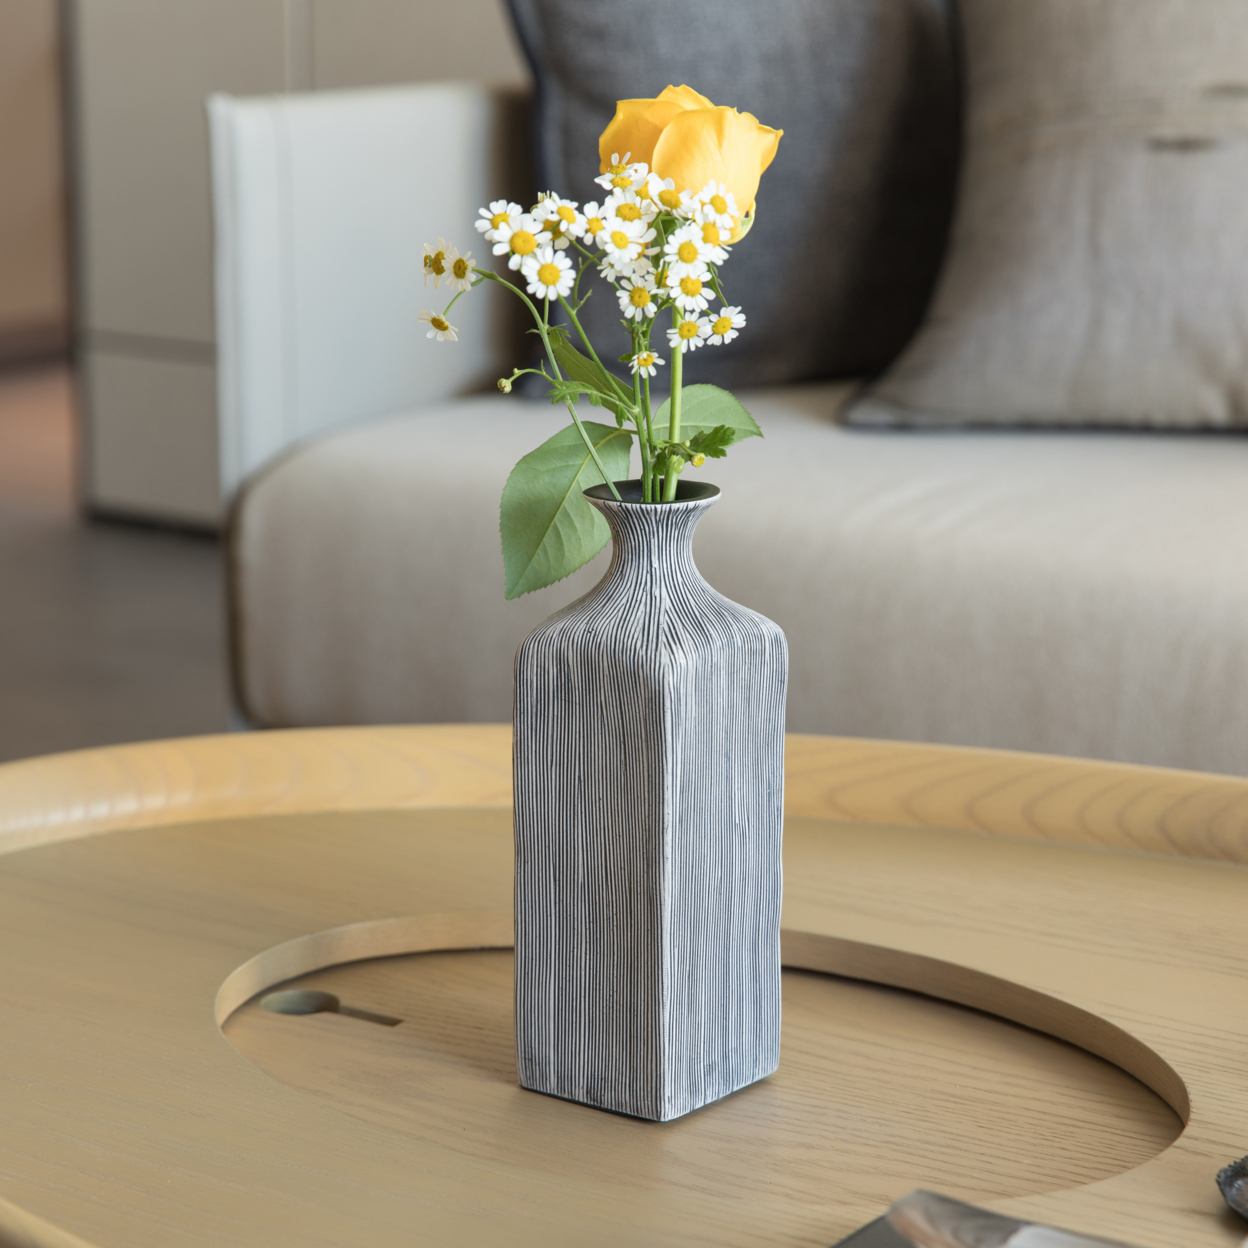 Contemporary Decorative Square Table Flower Vase With Gray Striped Design - Small